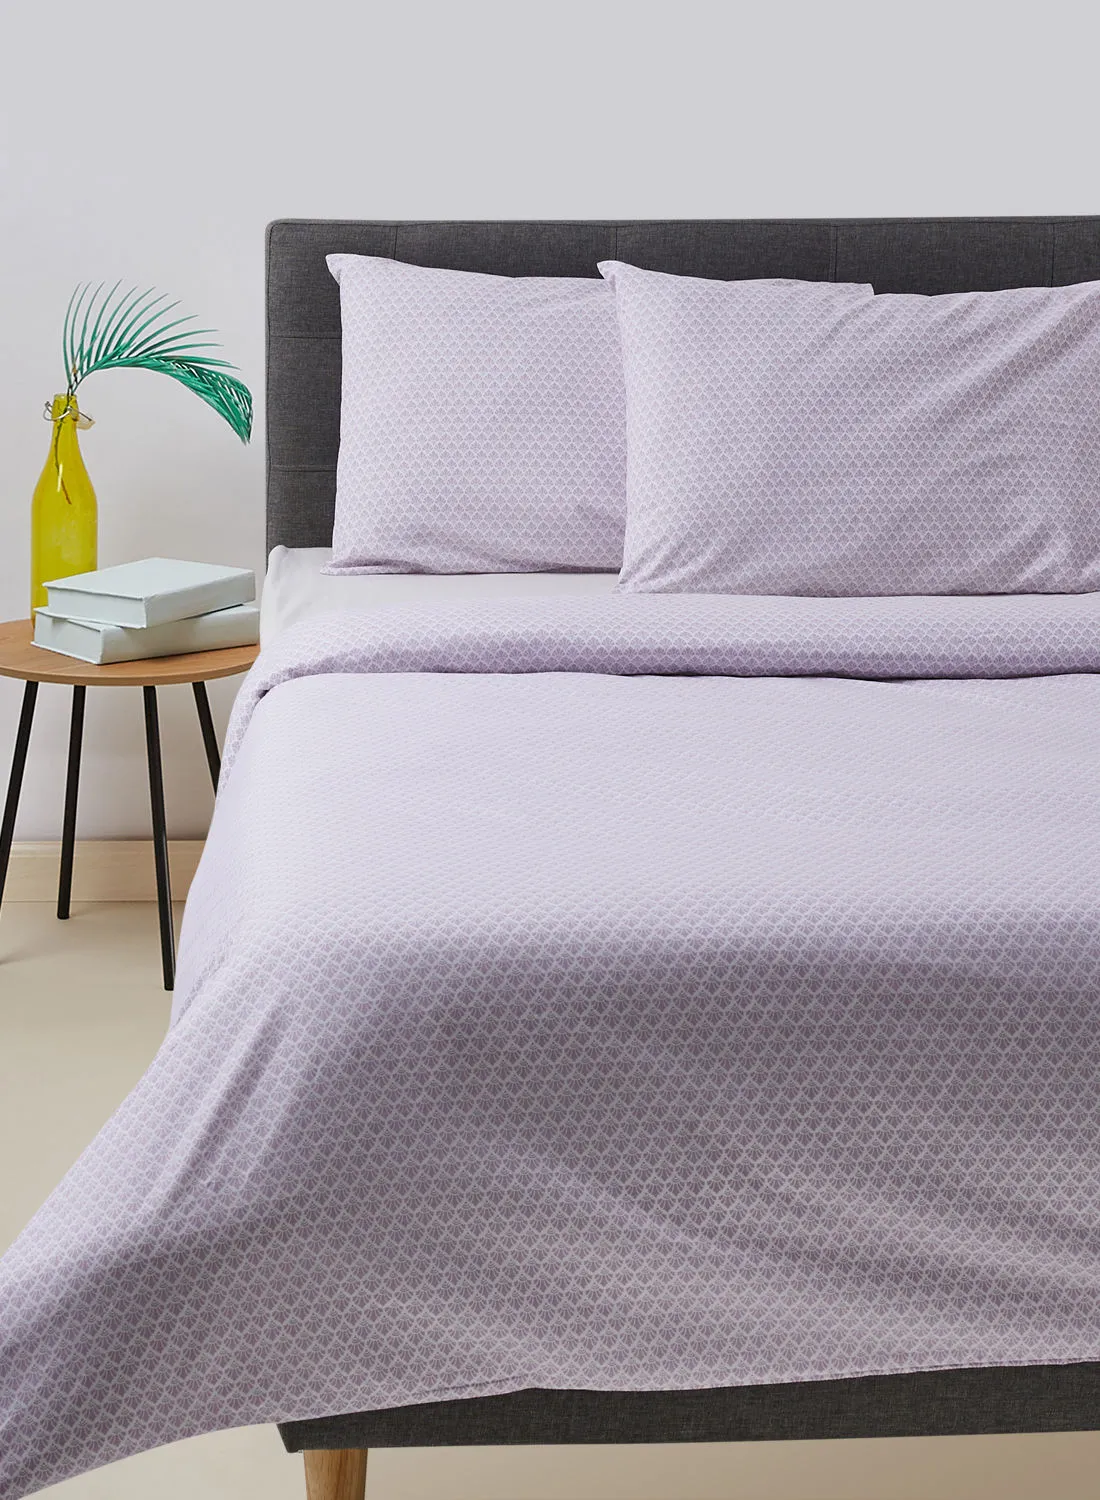 noon east Duvet Cover With Pillow Cover 50X75 Cm, Comforter 160X200 Cm, - For Queen Size Mattress - Purple 100% Cotton Percale - 180 Thread Count